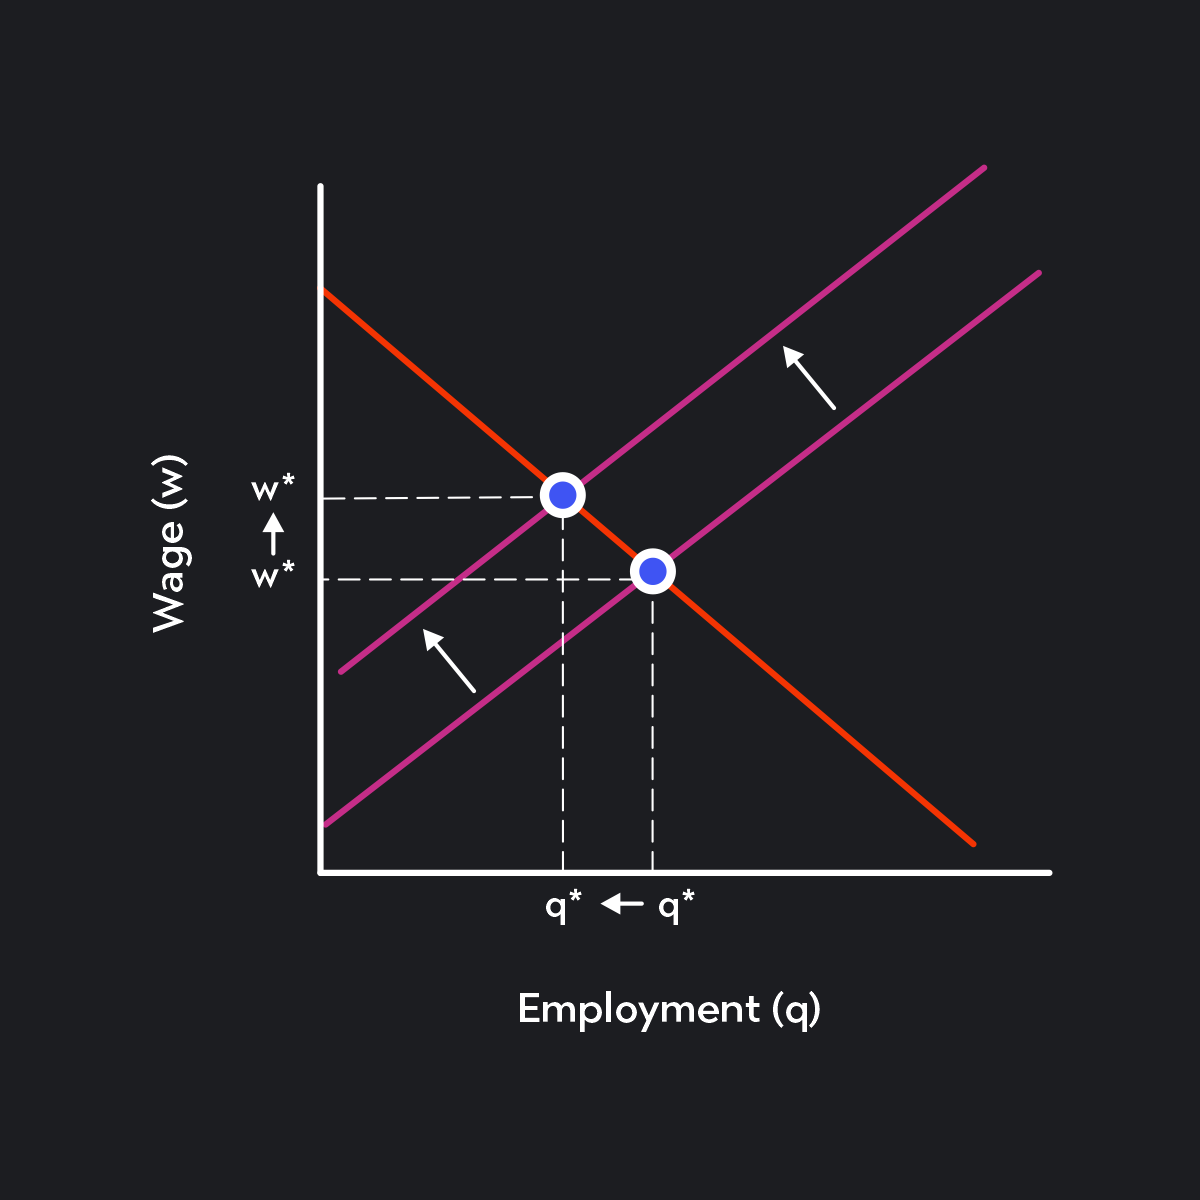 Graph showing an inward (leftward) shift of the labor supply curve